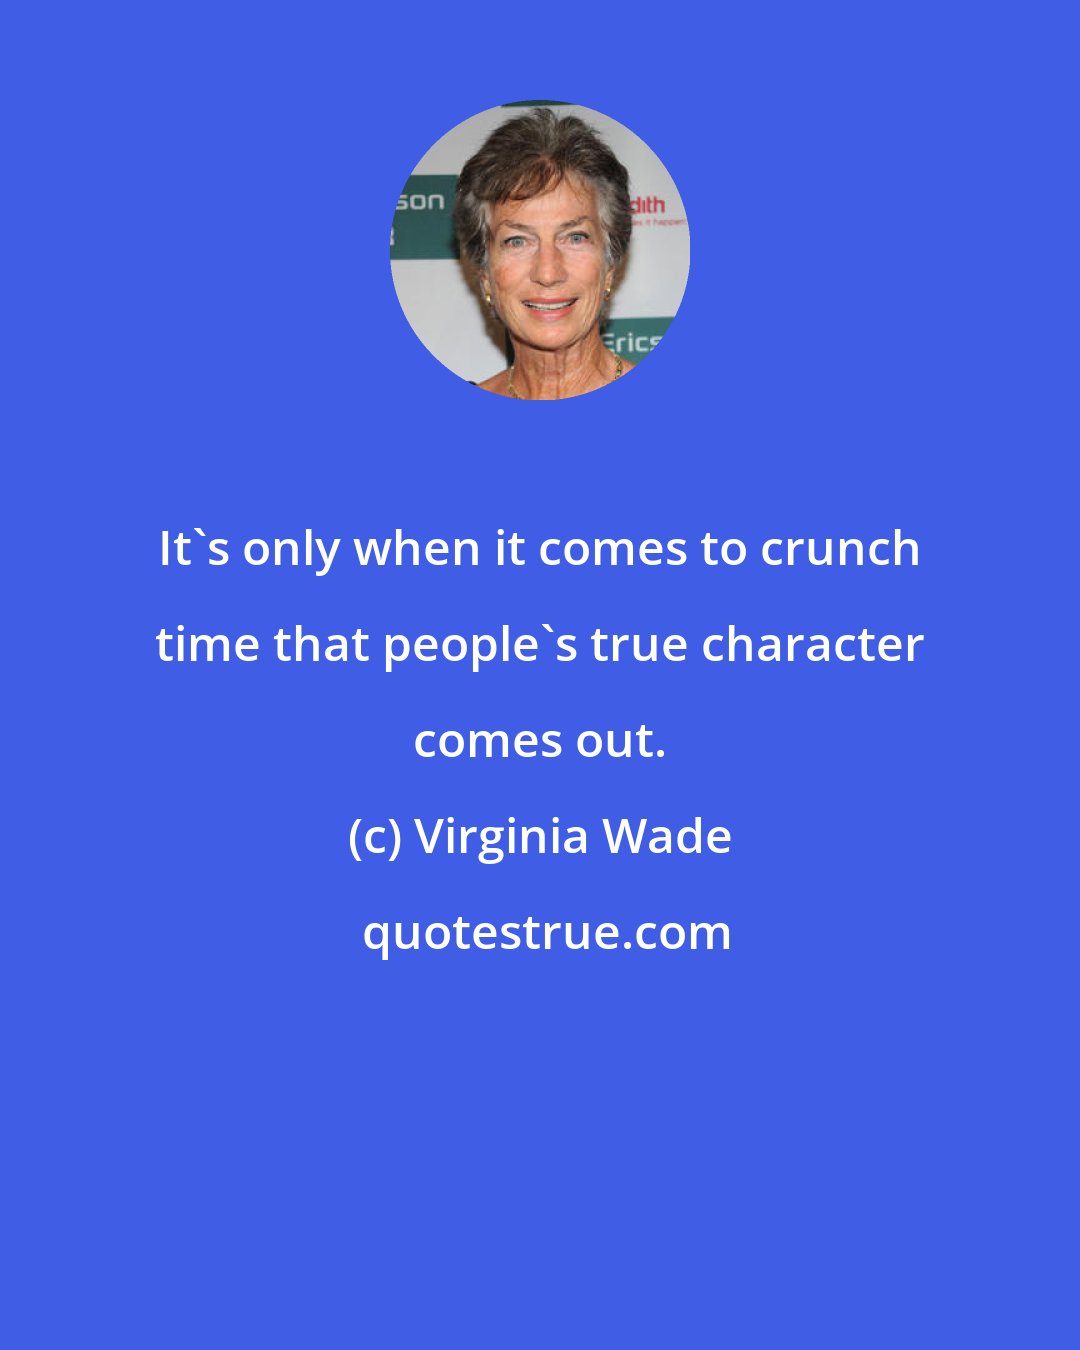 Virginia Wade: It's only when it comes to crunch time that people's true character comes out.